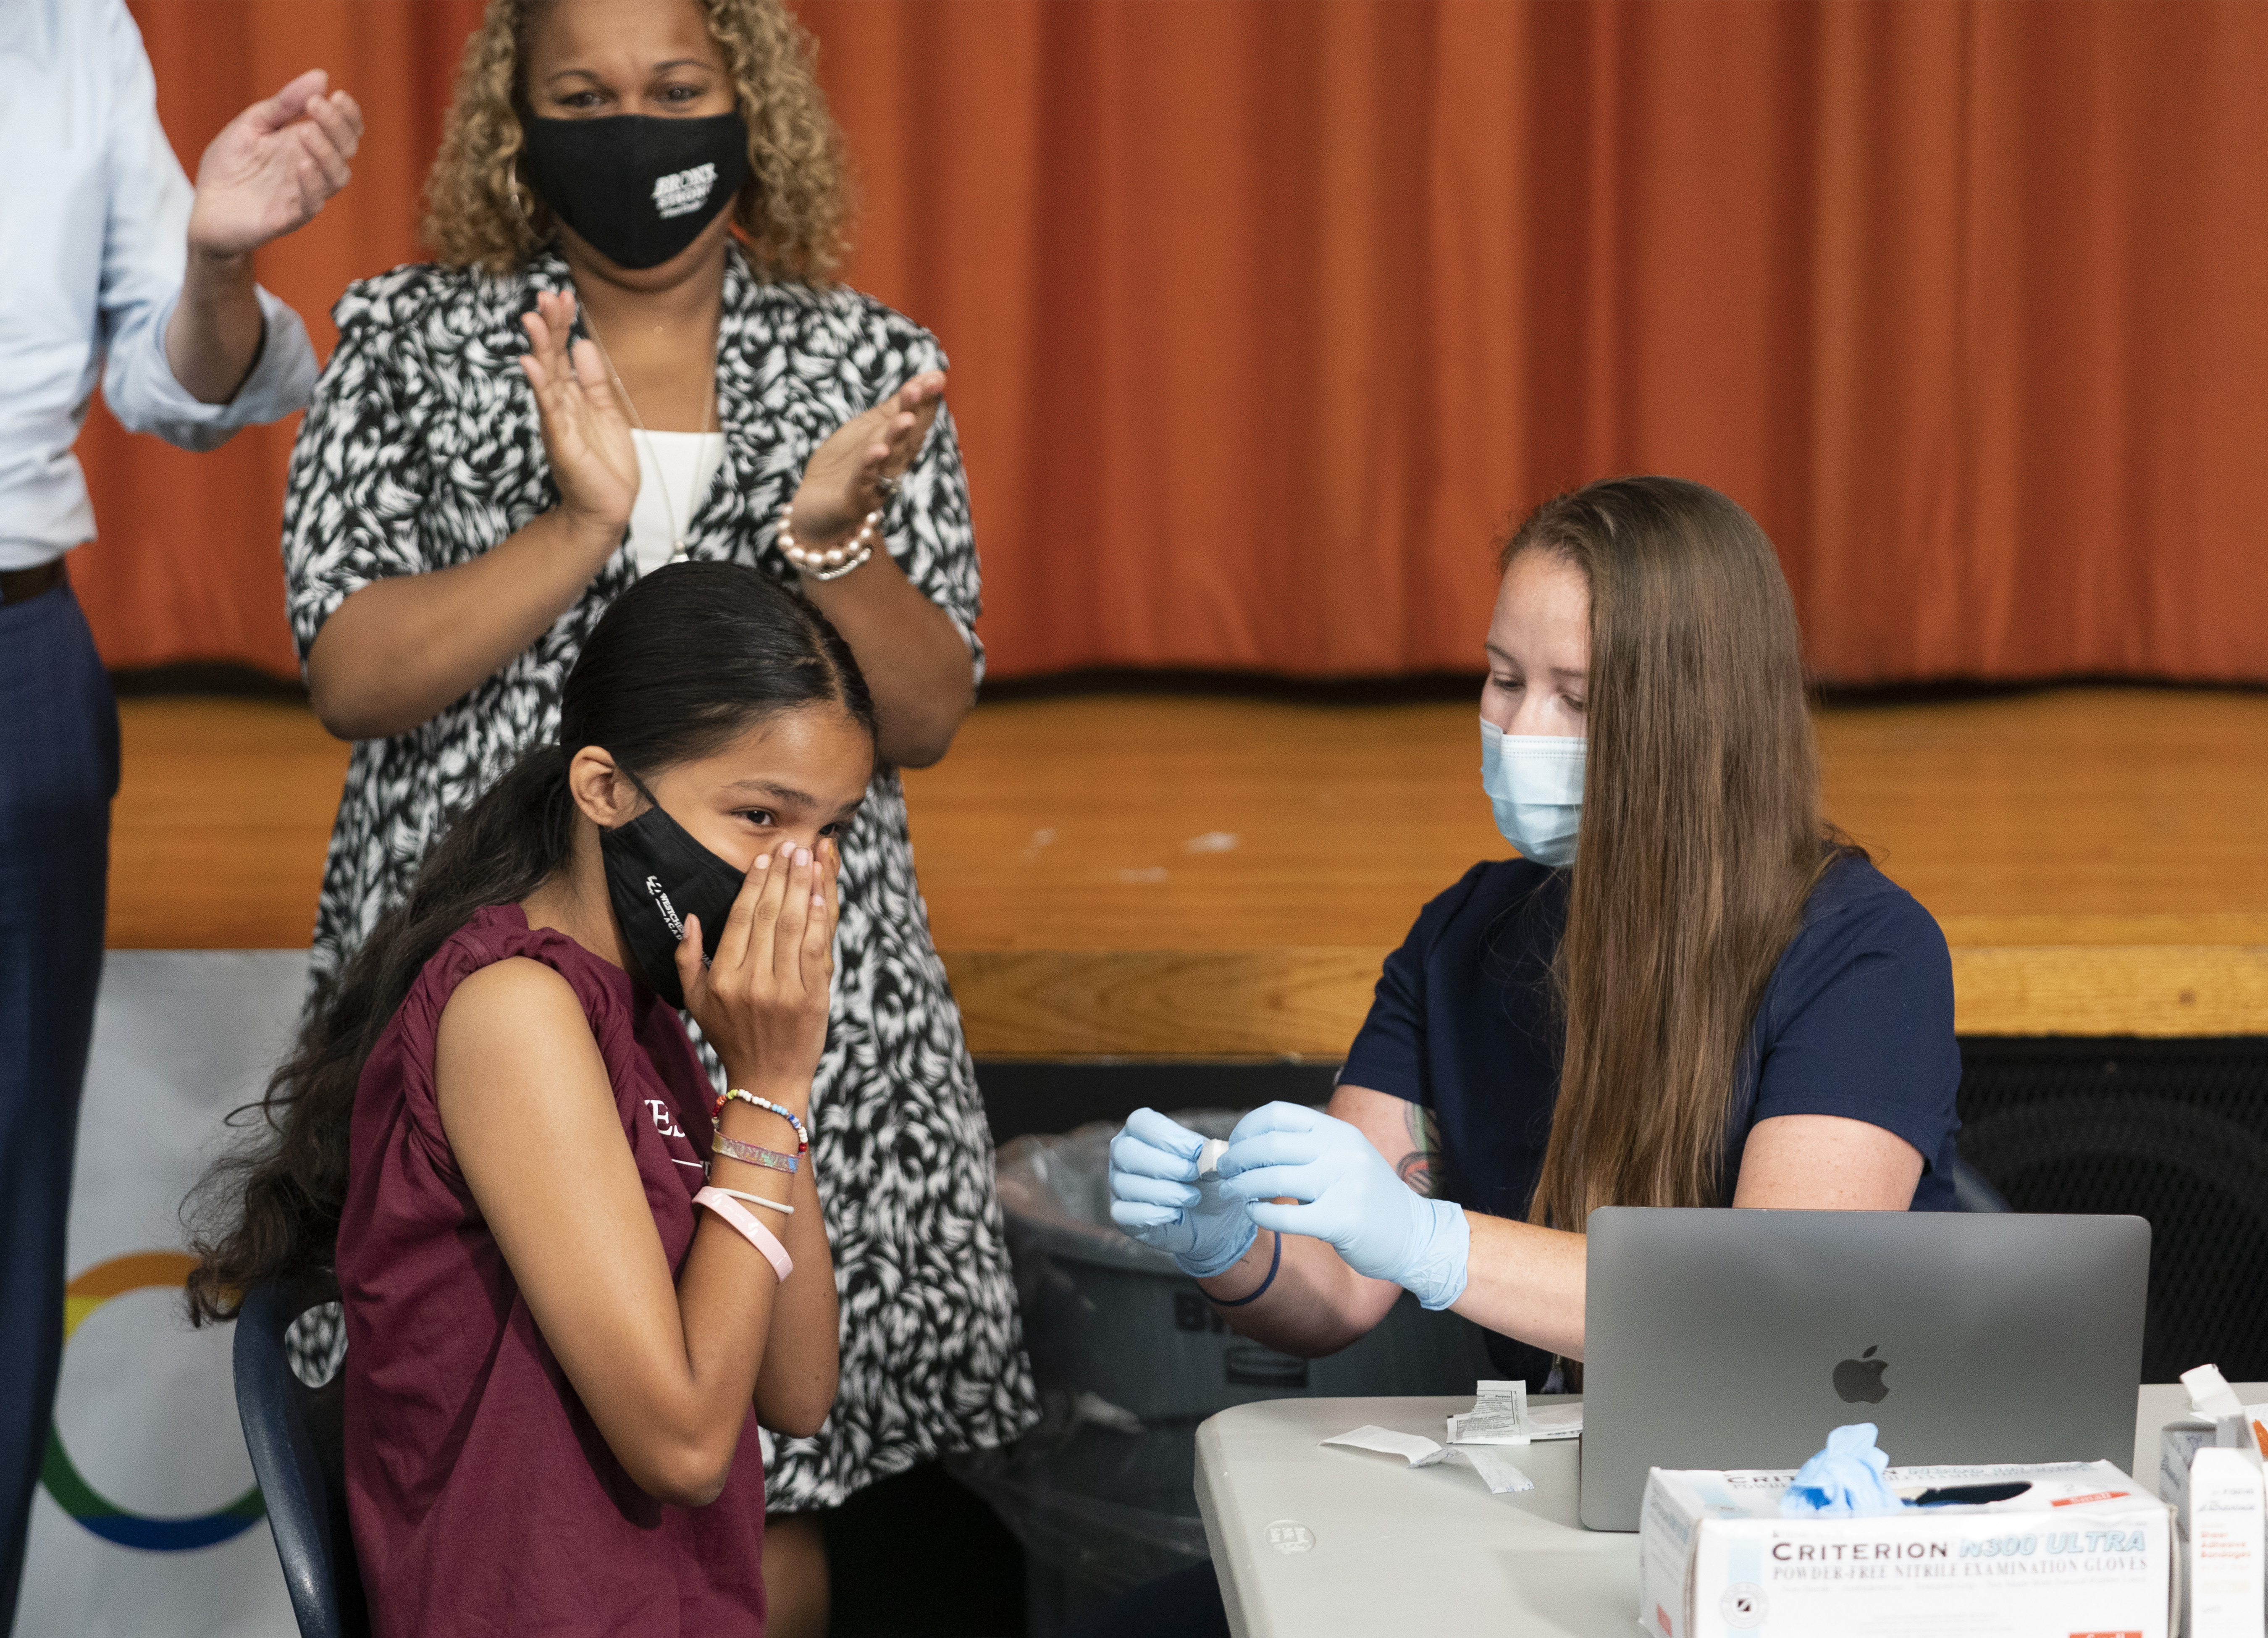 Ariel Quero, 16, left, a student at Lehman High School, reacts after getting the Pfizer COVID-19 vaccine from Katrina Taormina, right, July 27, 2021, in New York. The U.S. is expanding COVID-19 boosters, ruling that 16- and 17-year-olds can get a third dose of Pfizer’s vaccine. 